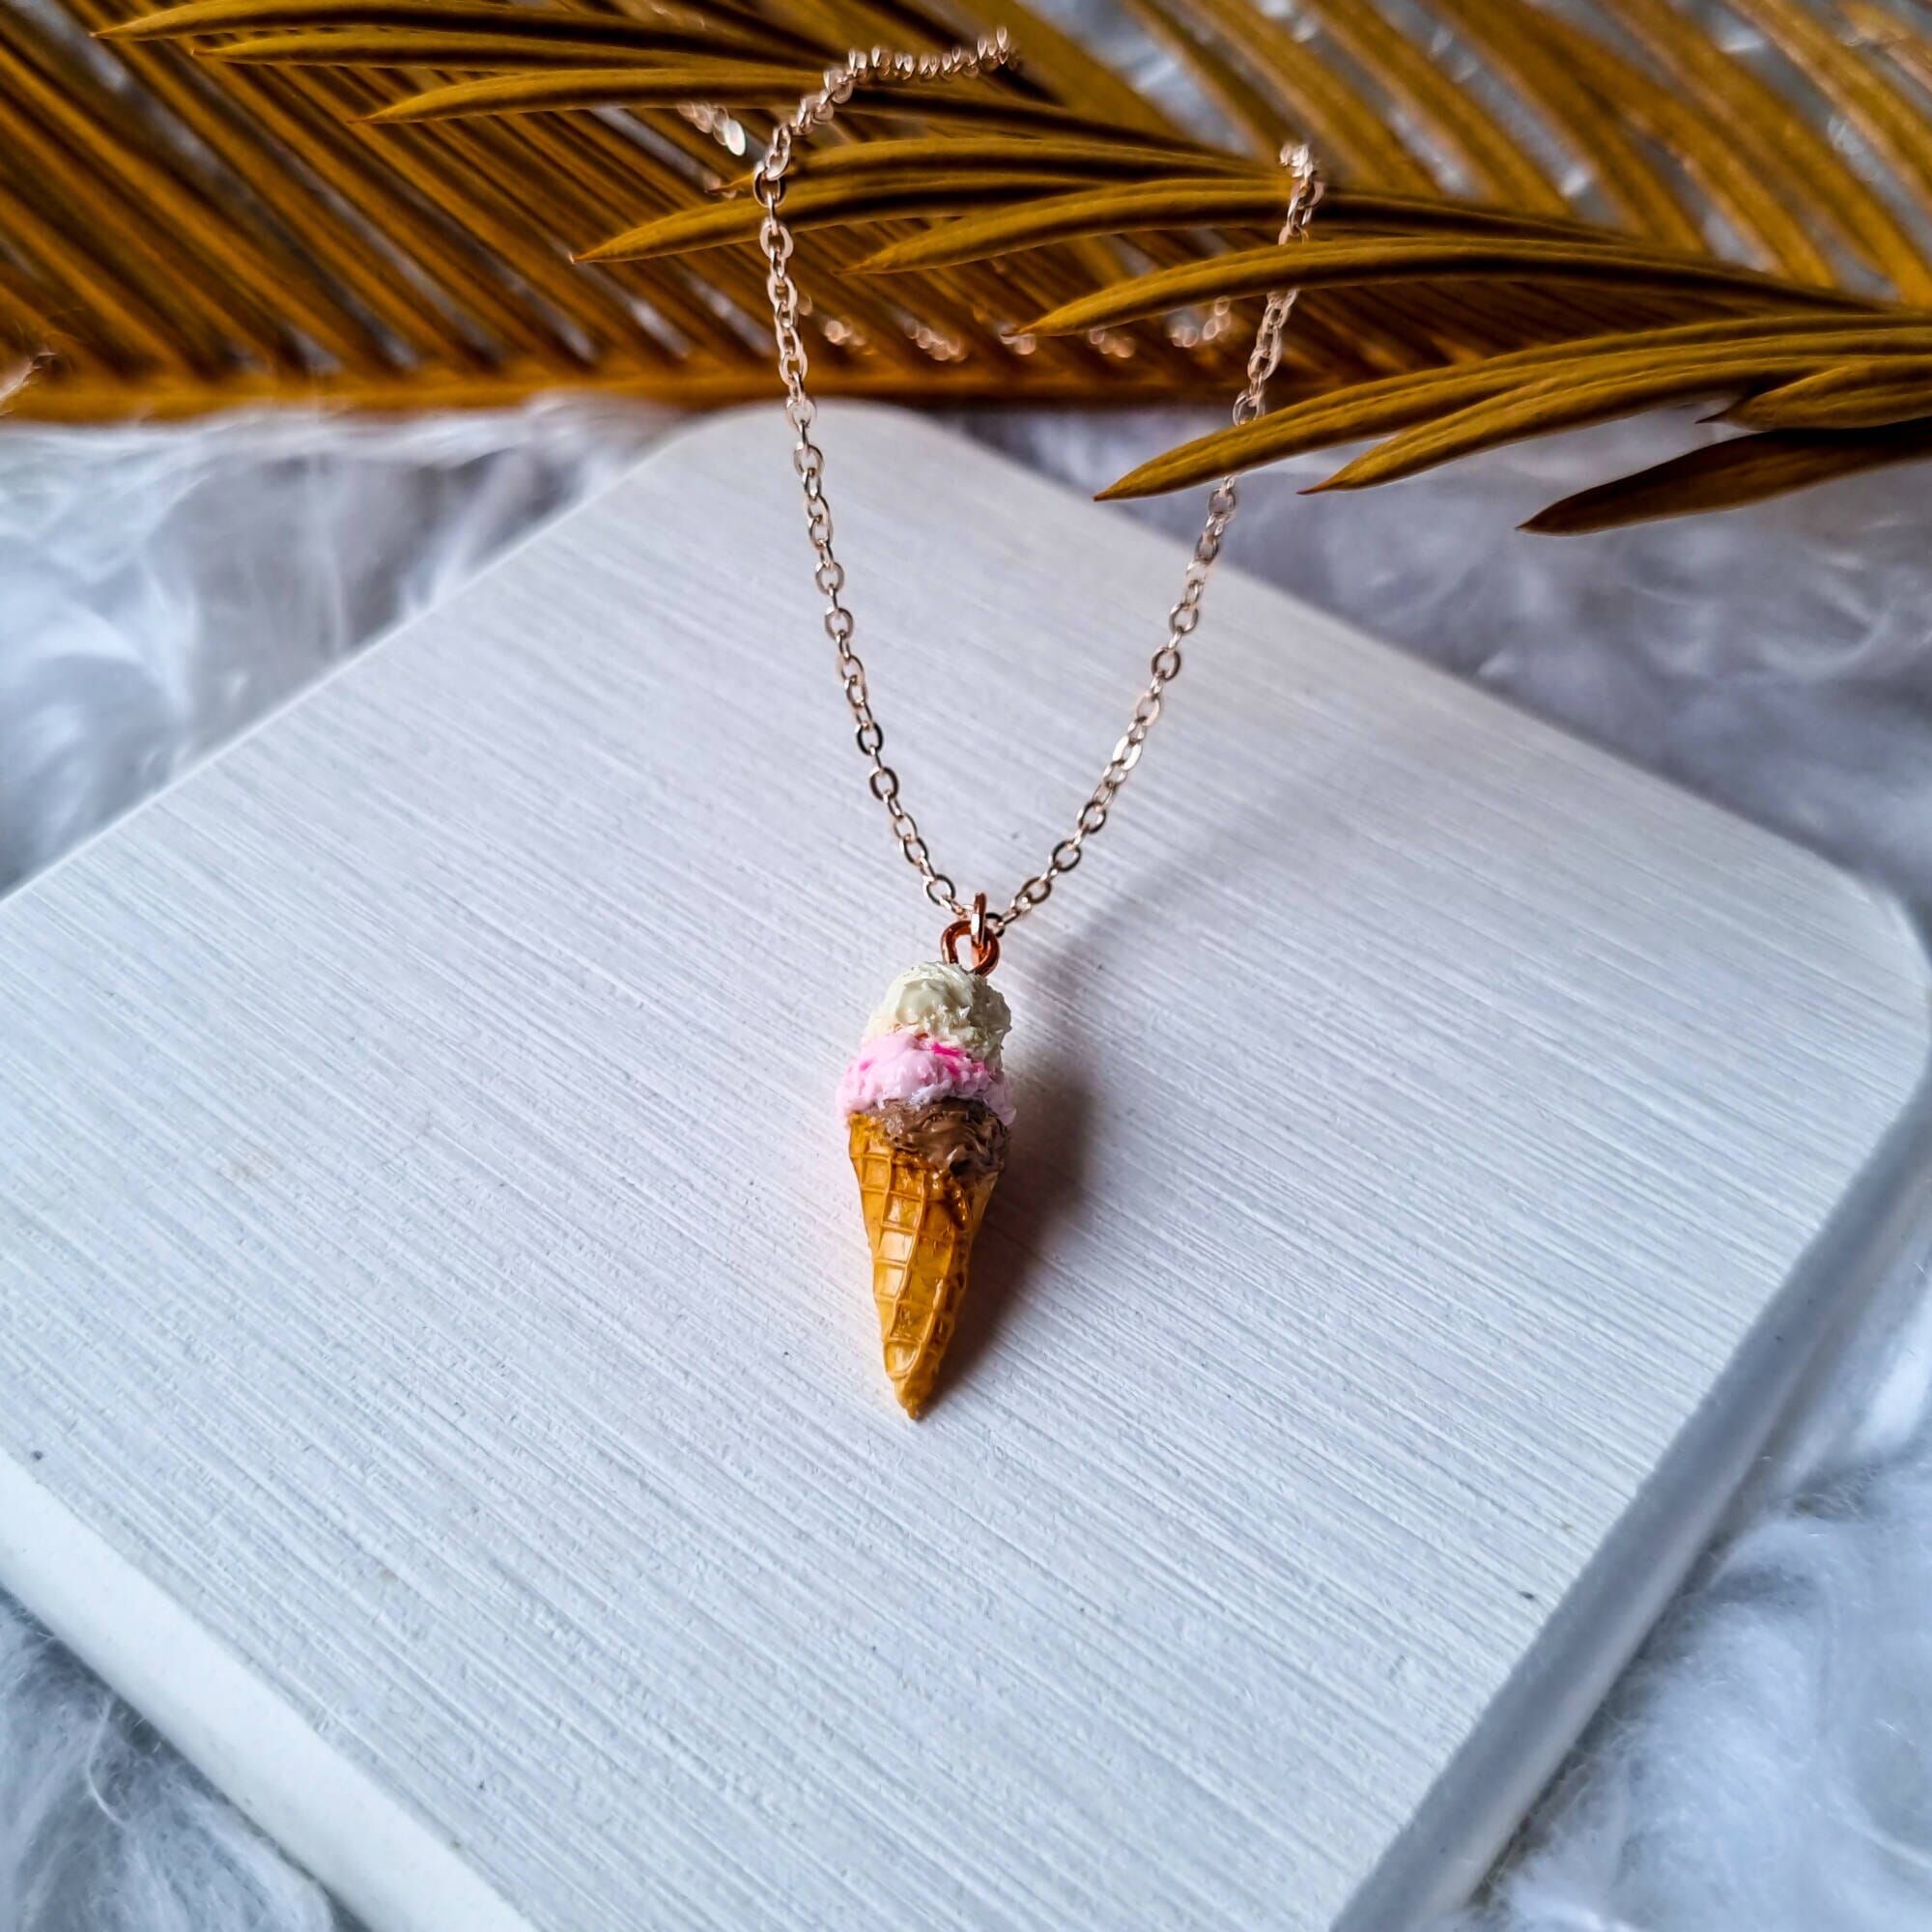 Triple Scoop Ice Cream Cone Pendant and Chain Necklace Necklaces TingCorner Rose Gold 